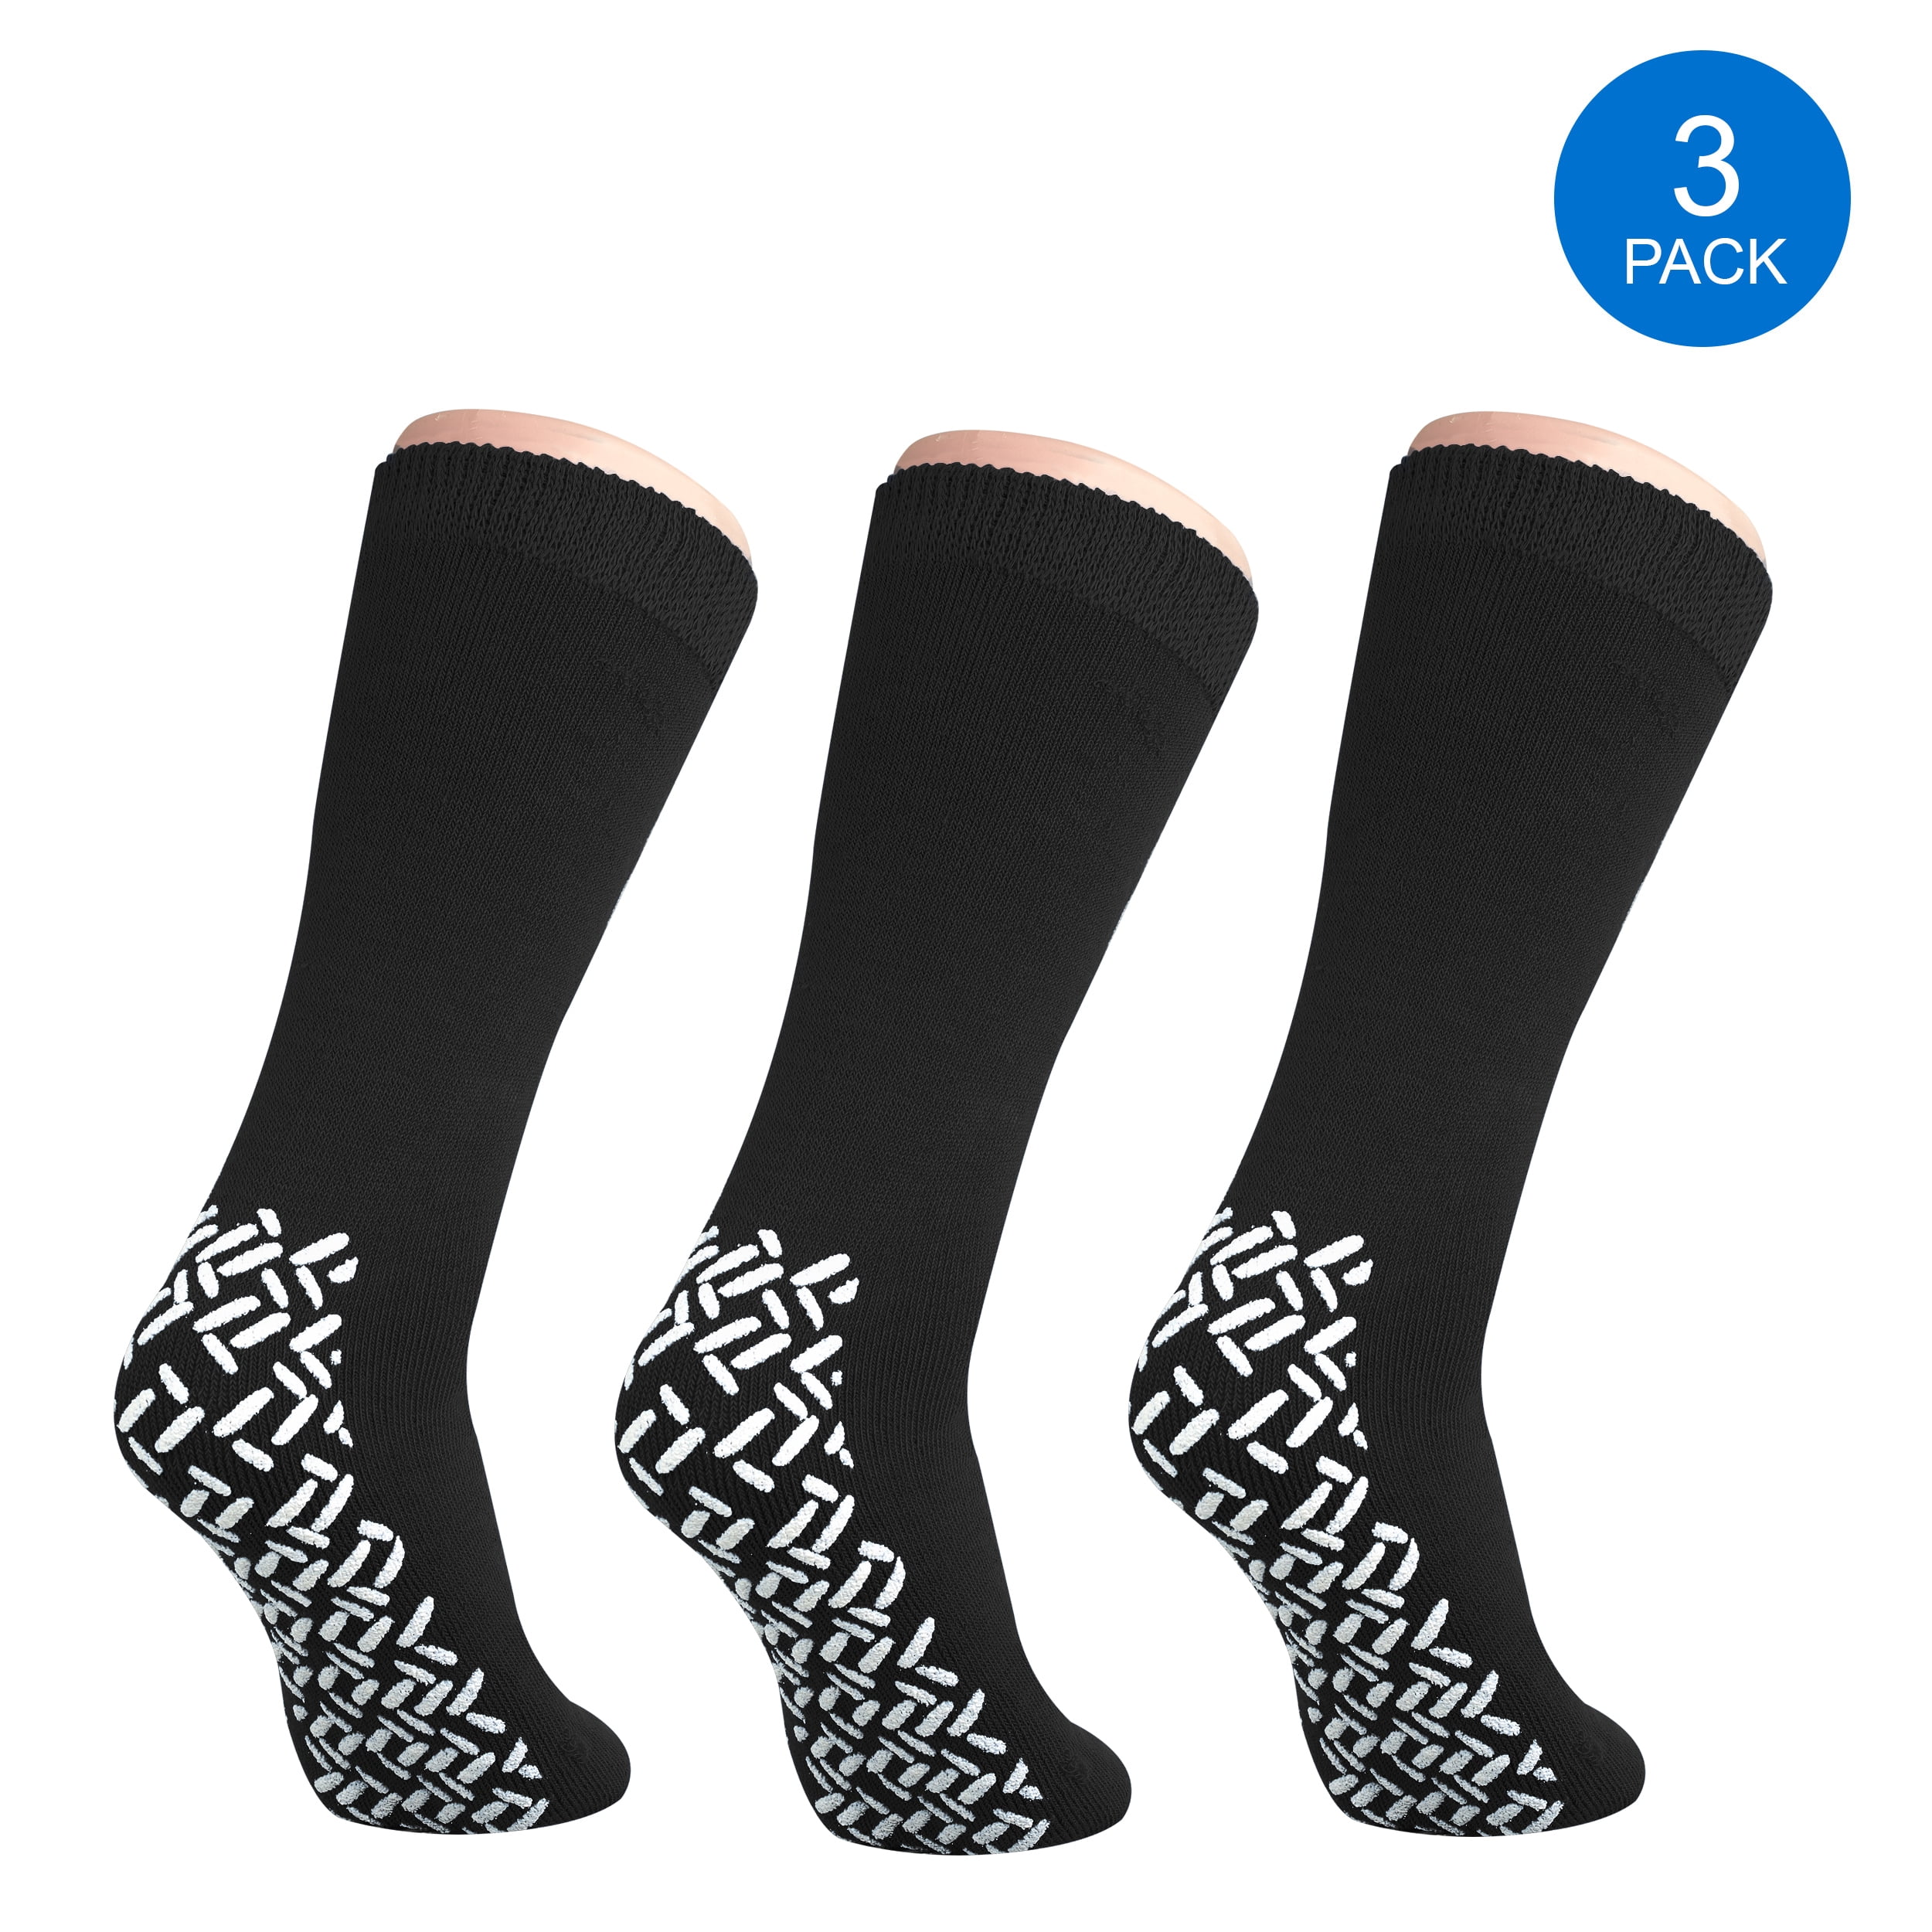 Extra Wide Socks for Swollen Feet, Extra Wide Bariatric Socks, Non